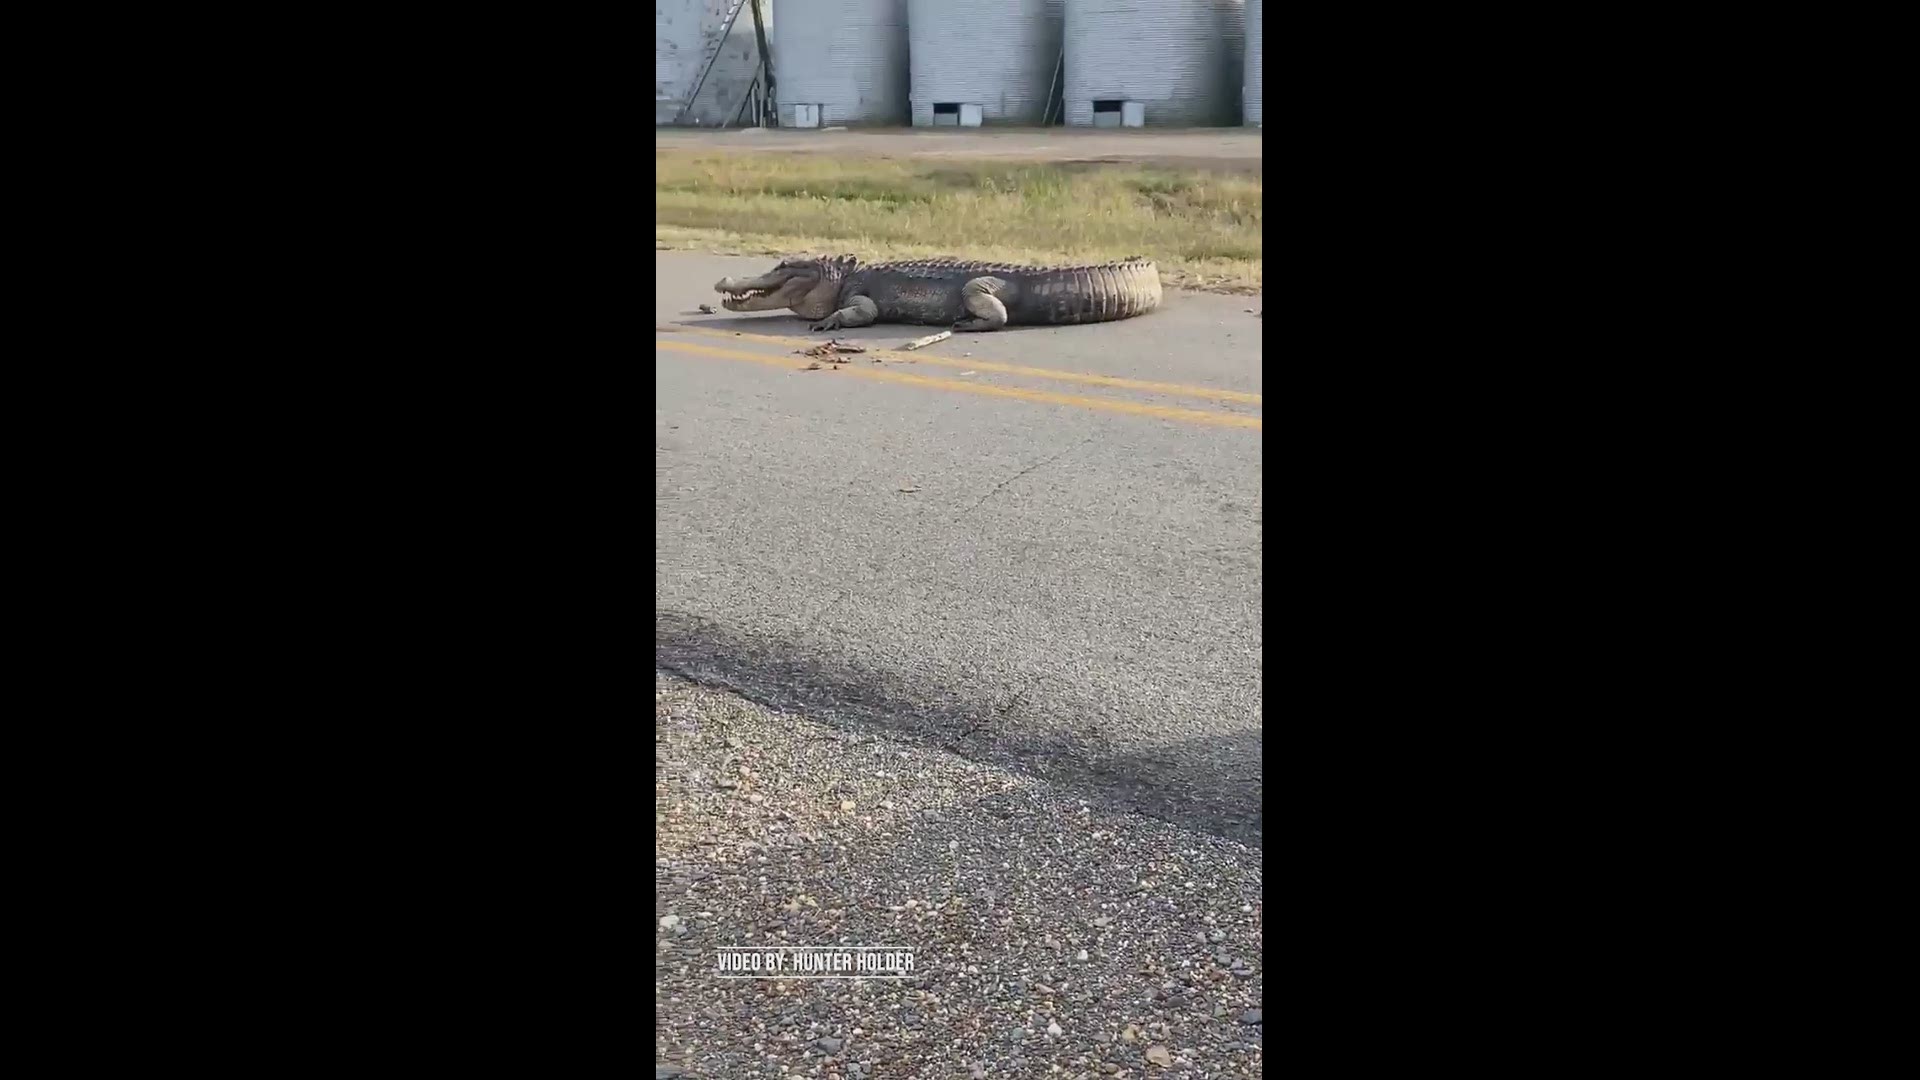 Hunter Holder captured a video of an alligator found wandering on a road east of Pine Bluff.